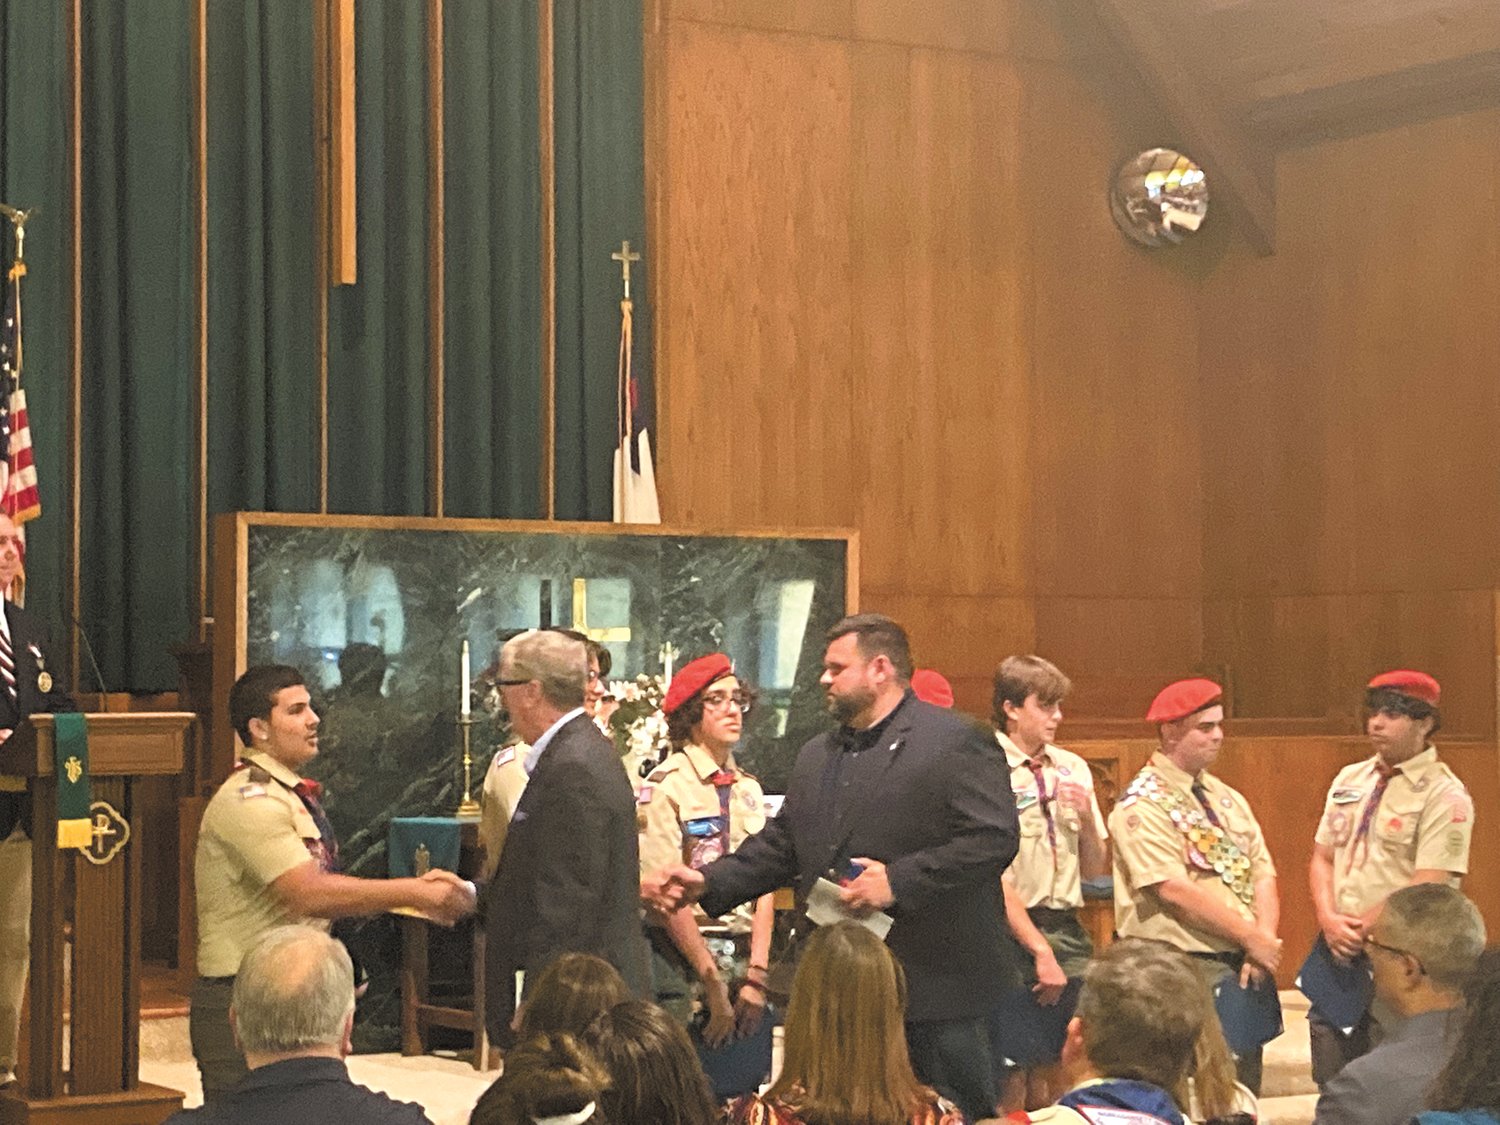 GREAT ACHIEVEMENT: Ken Hopkins and Council President Chris Paplauskas shake hands with each of the Eagle scouts. (Herald photo)